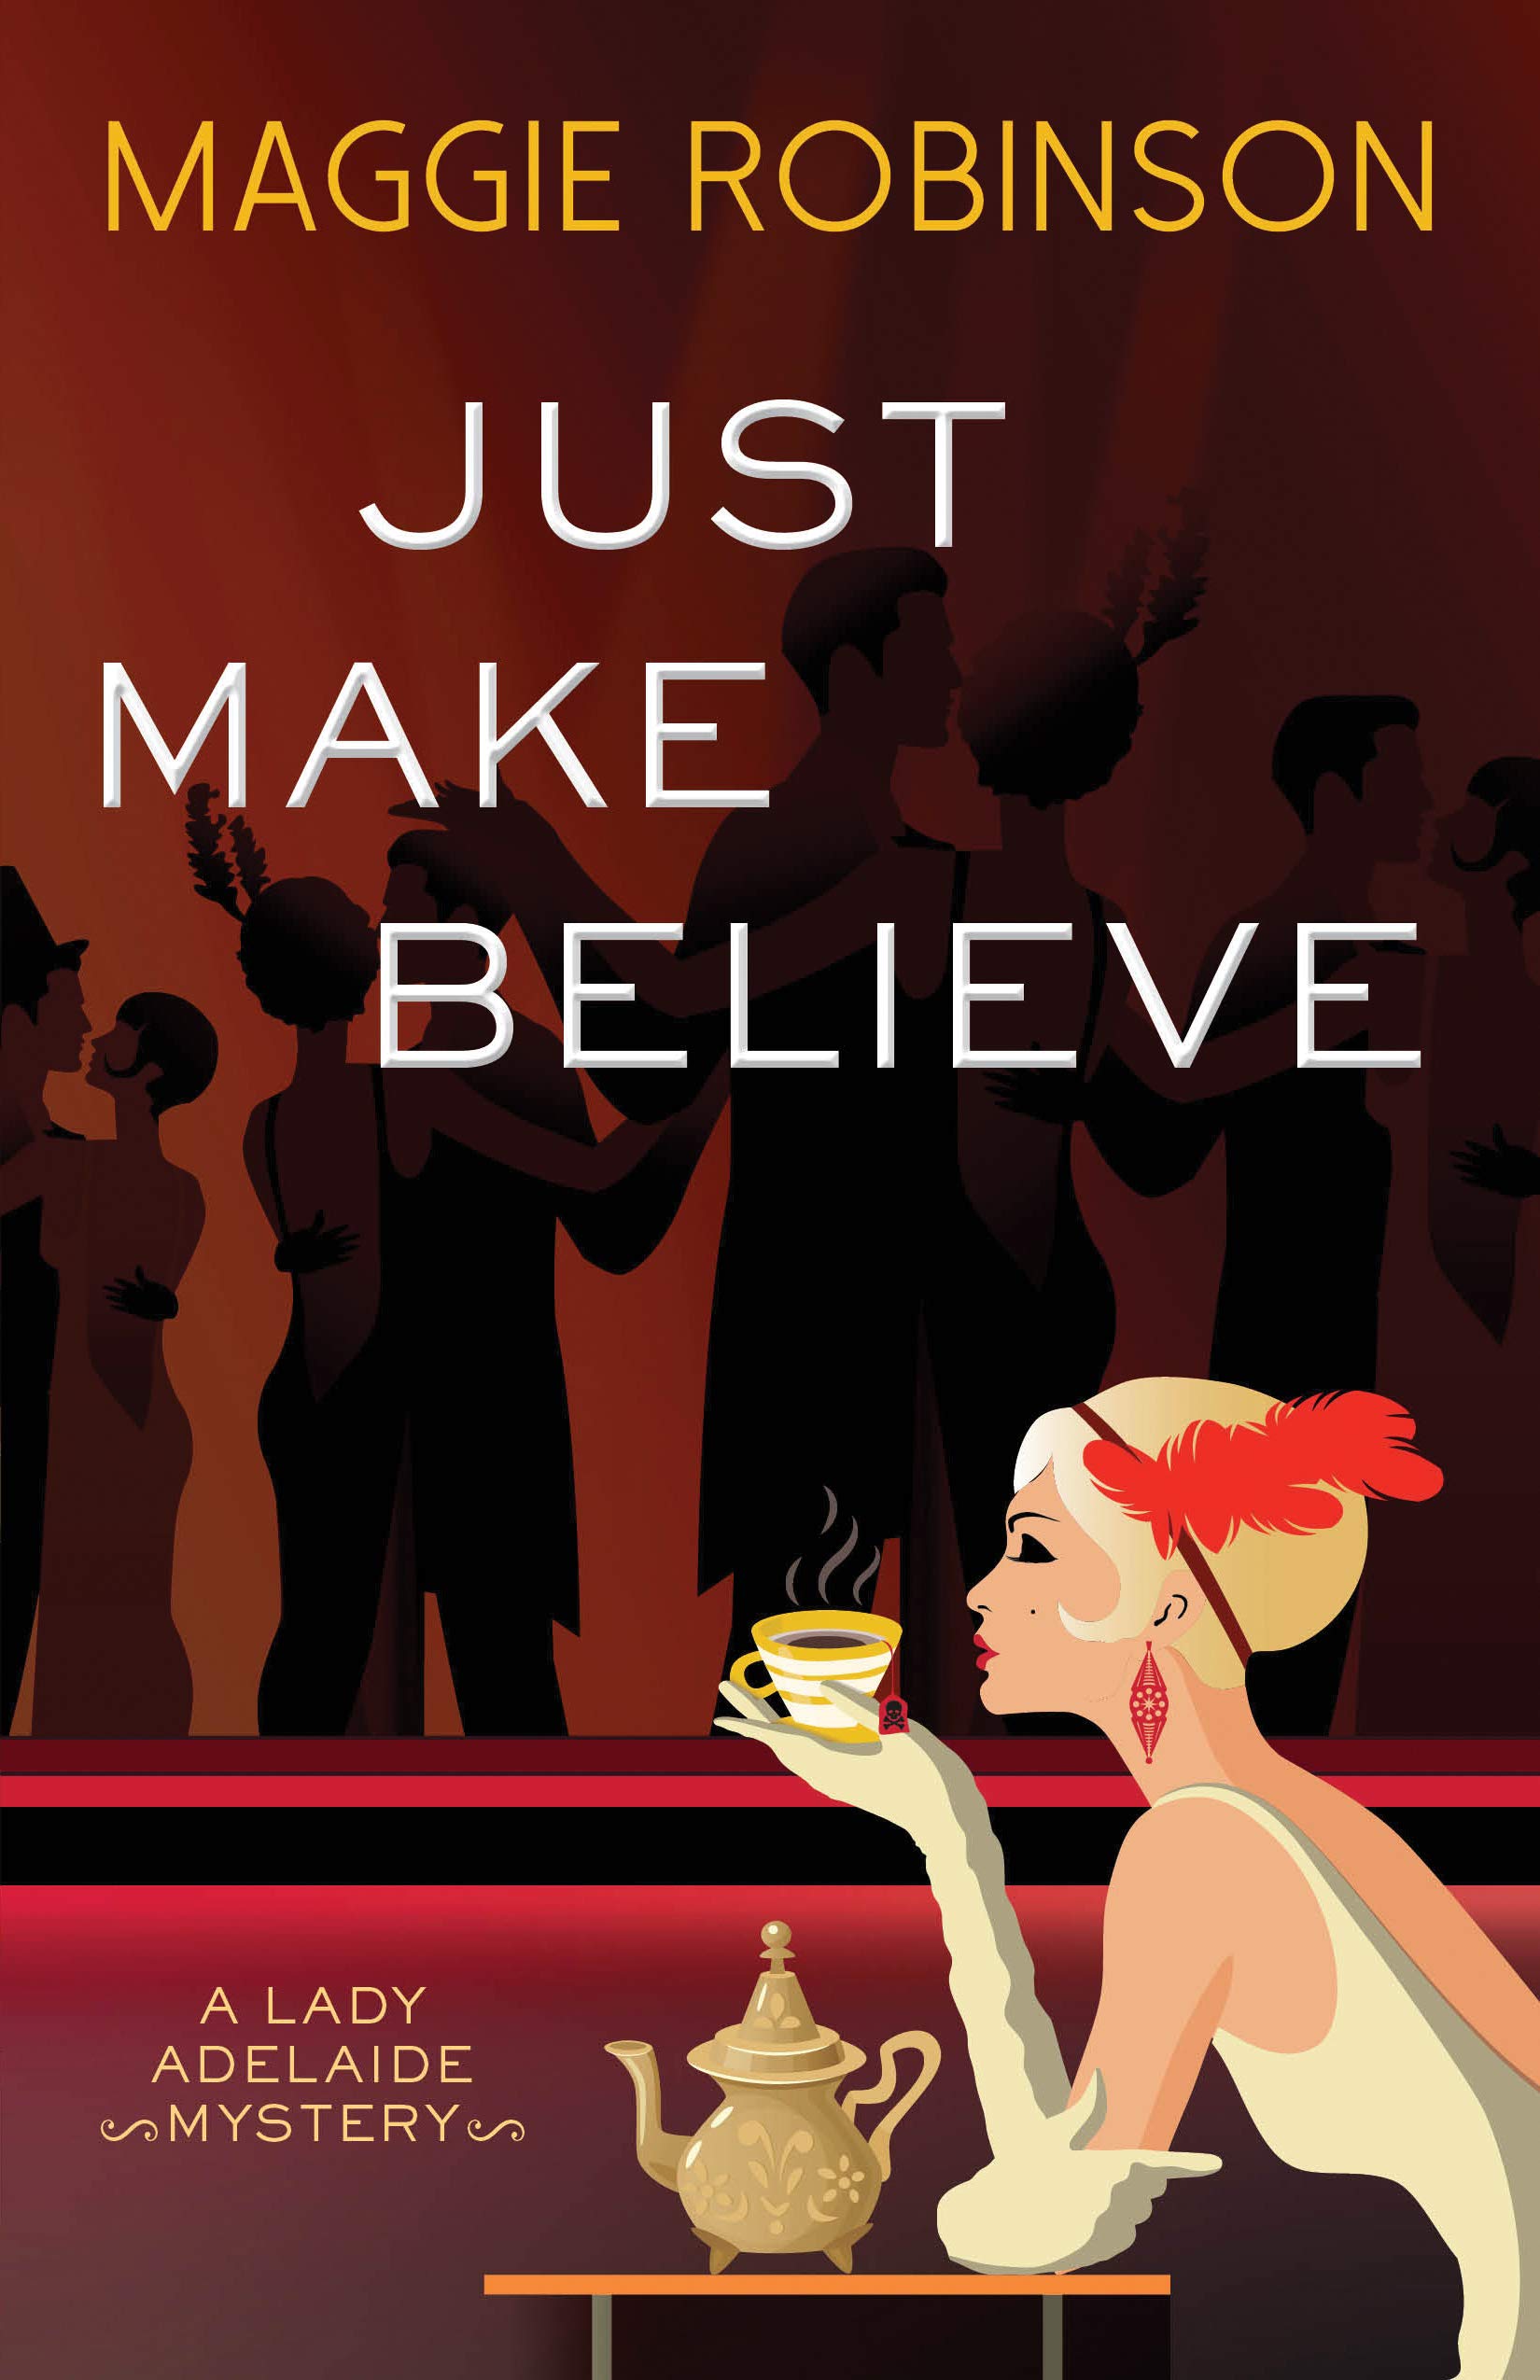 Just Make Believe by Maggie Robinson